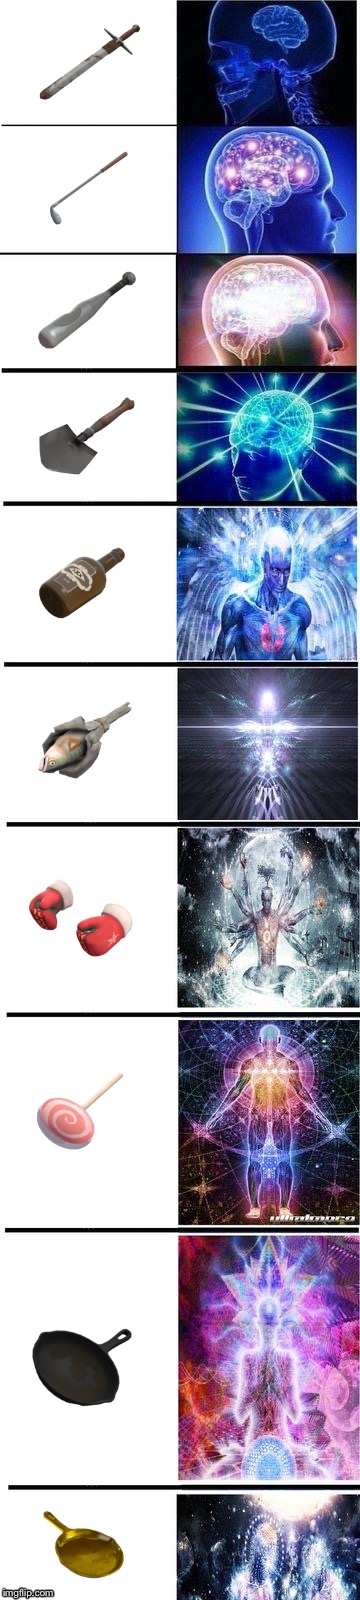 expanding brain | image tagged in expanding brain | made w/ Imgflip meme maker